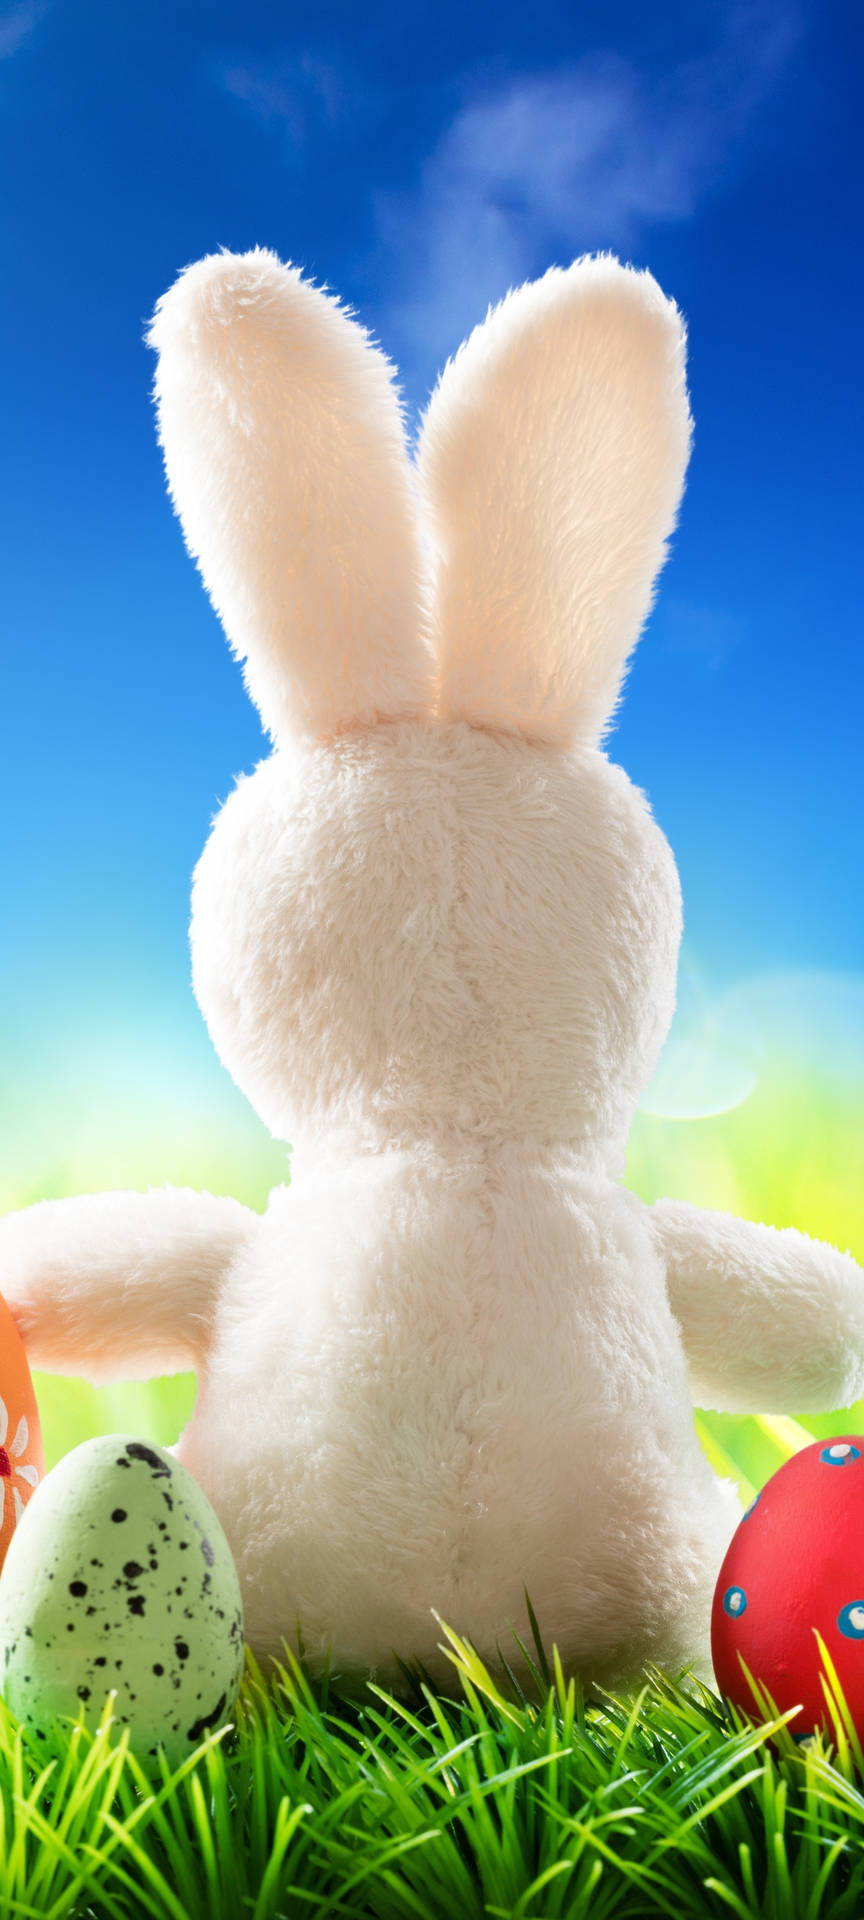 An Easter-themed smartphone that stands out in the crowd Wallpaper